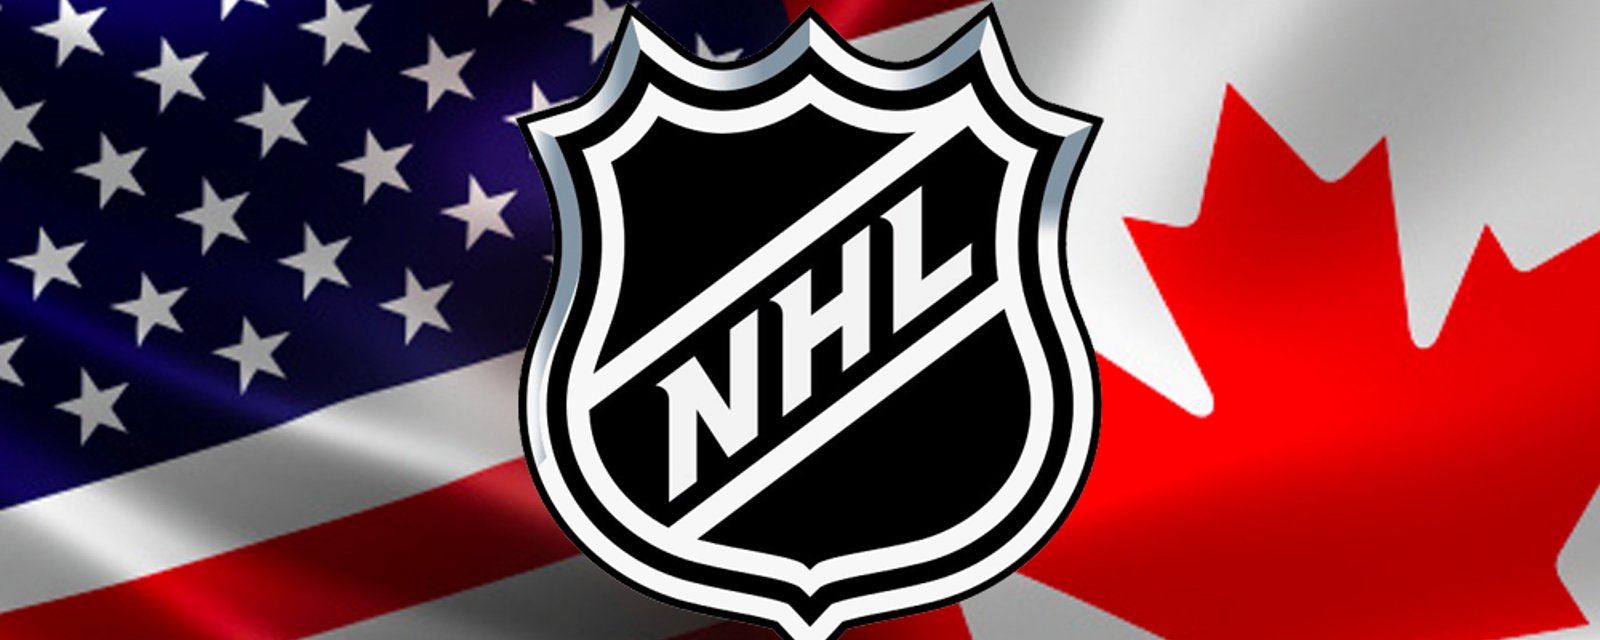 Stars decision sparks a debate amongst hockey fans, “Should teams be forced to play the national anthem?”